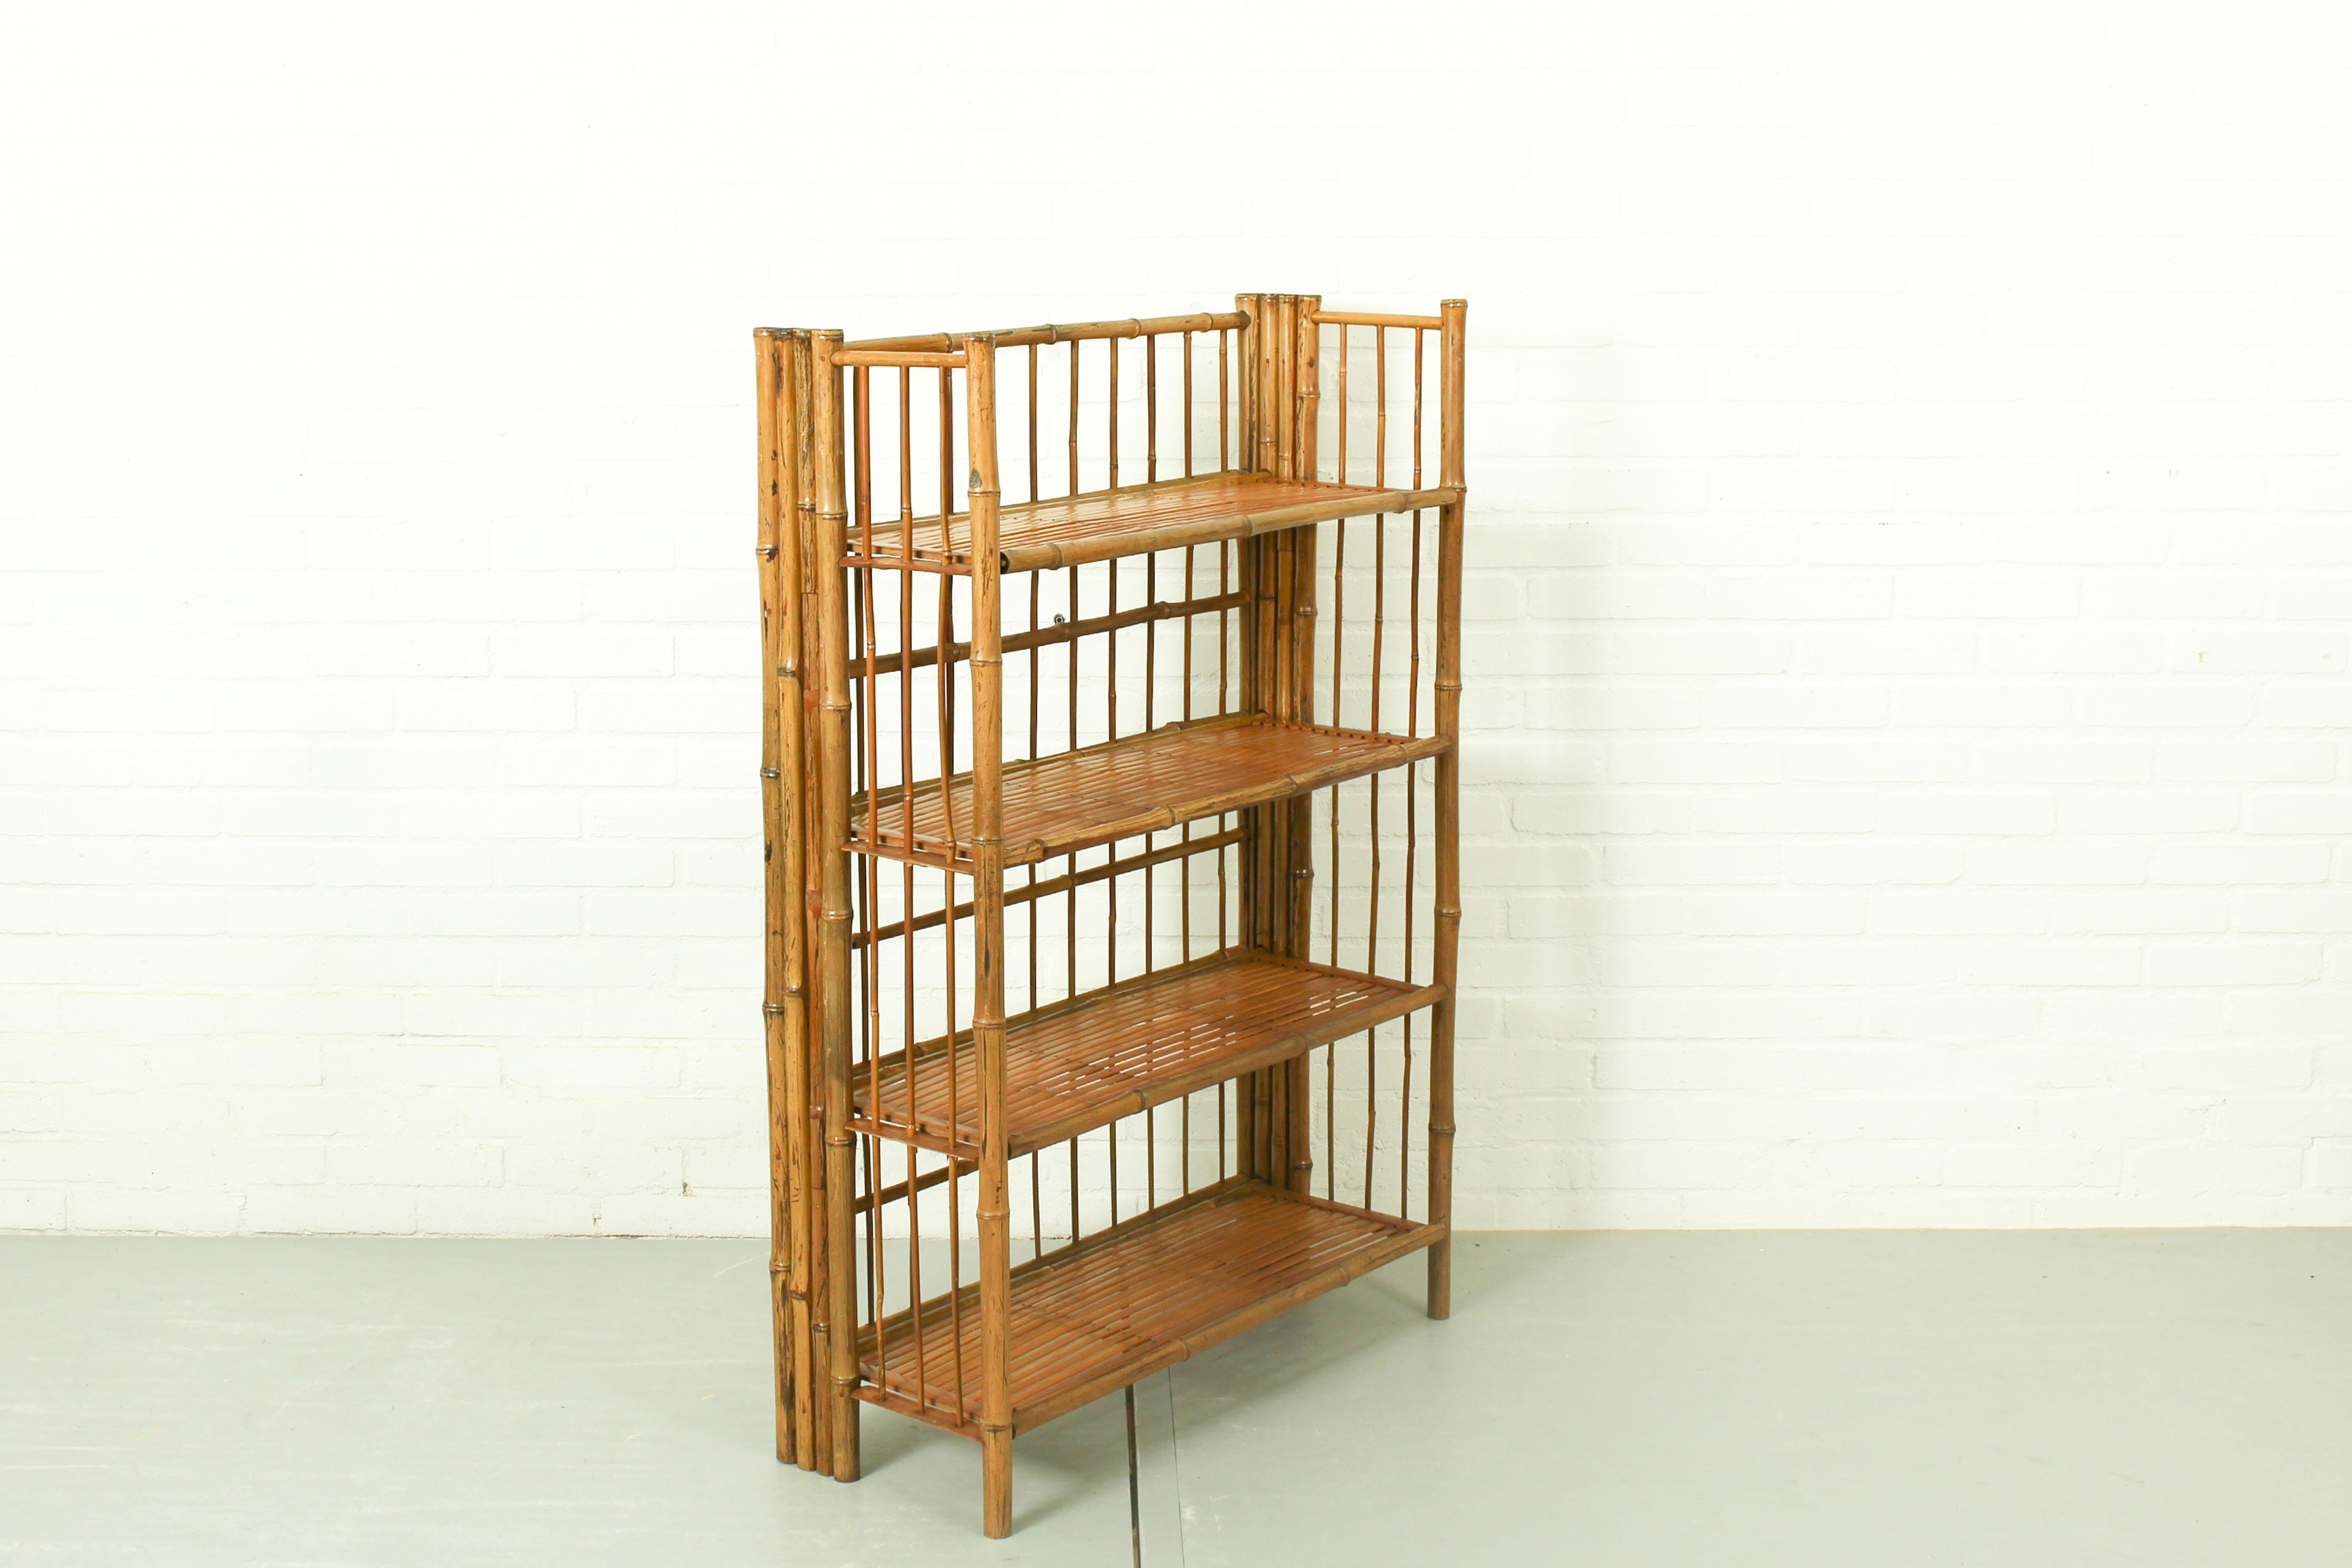 Bamboo Folding Campaign Shelves, France 1920s. This bamboo shelf and racks is suitable for all kind of use; In your bathroom as a towel rack,  in your home office as book shelf or in your showroom as retail display rack. 

Dimensions: 114cm h, 80cm